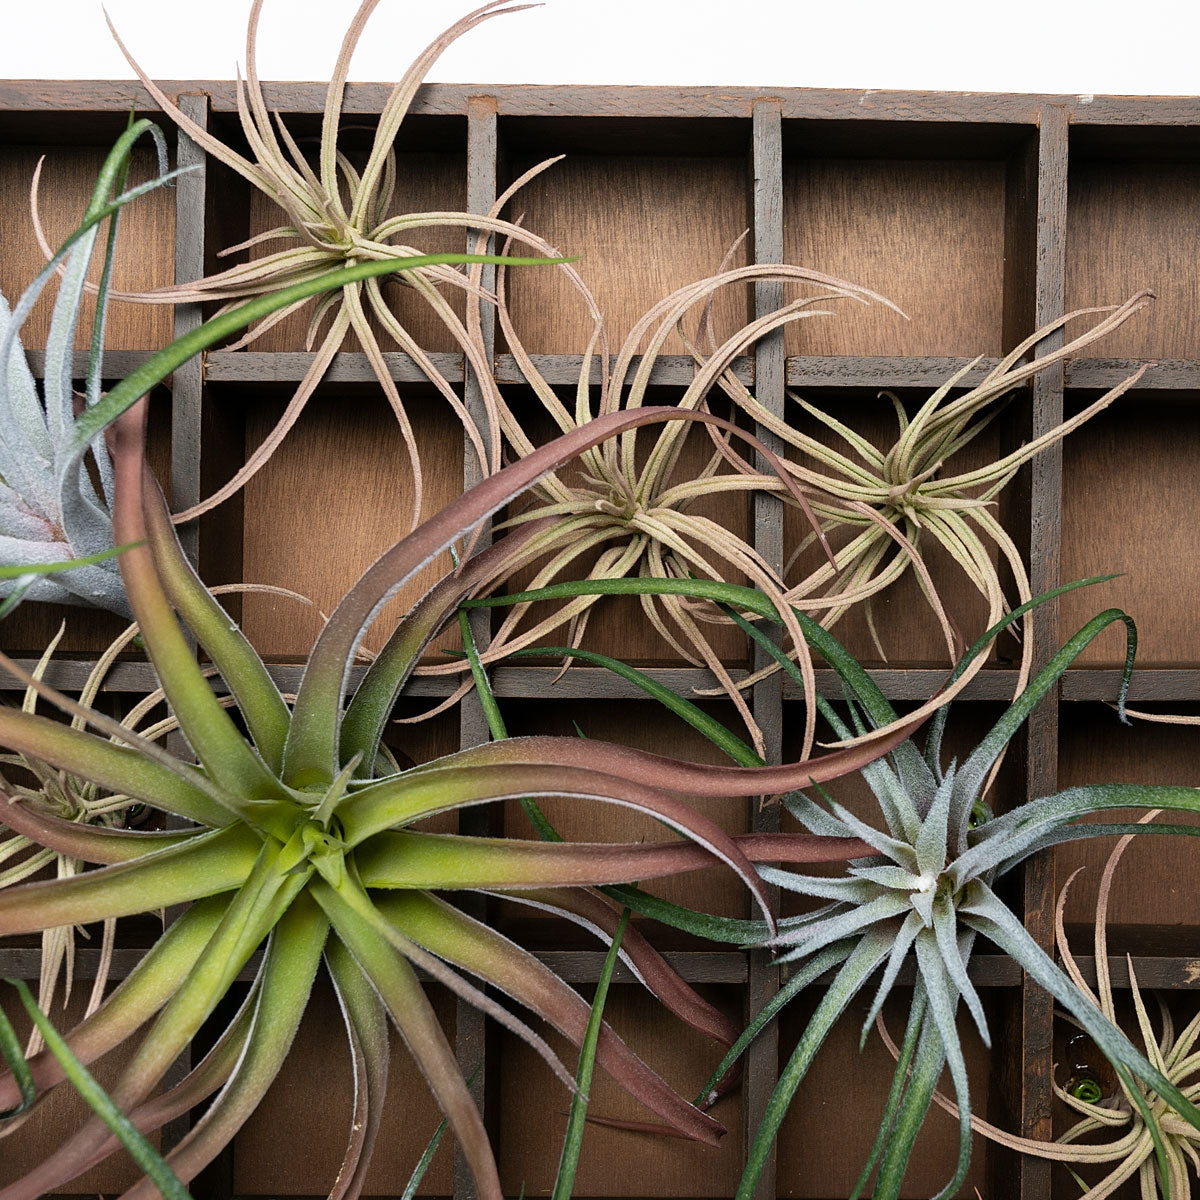 Green Wall, Pixelated Air Plants, 64 Compartments